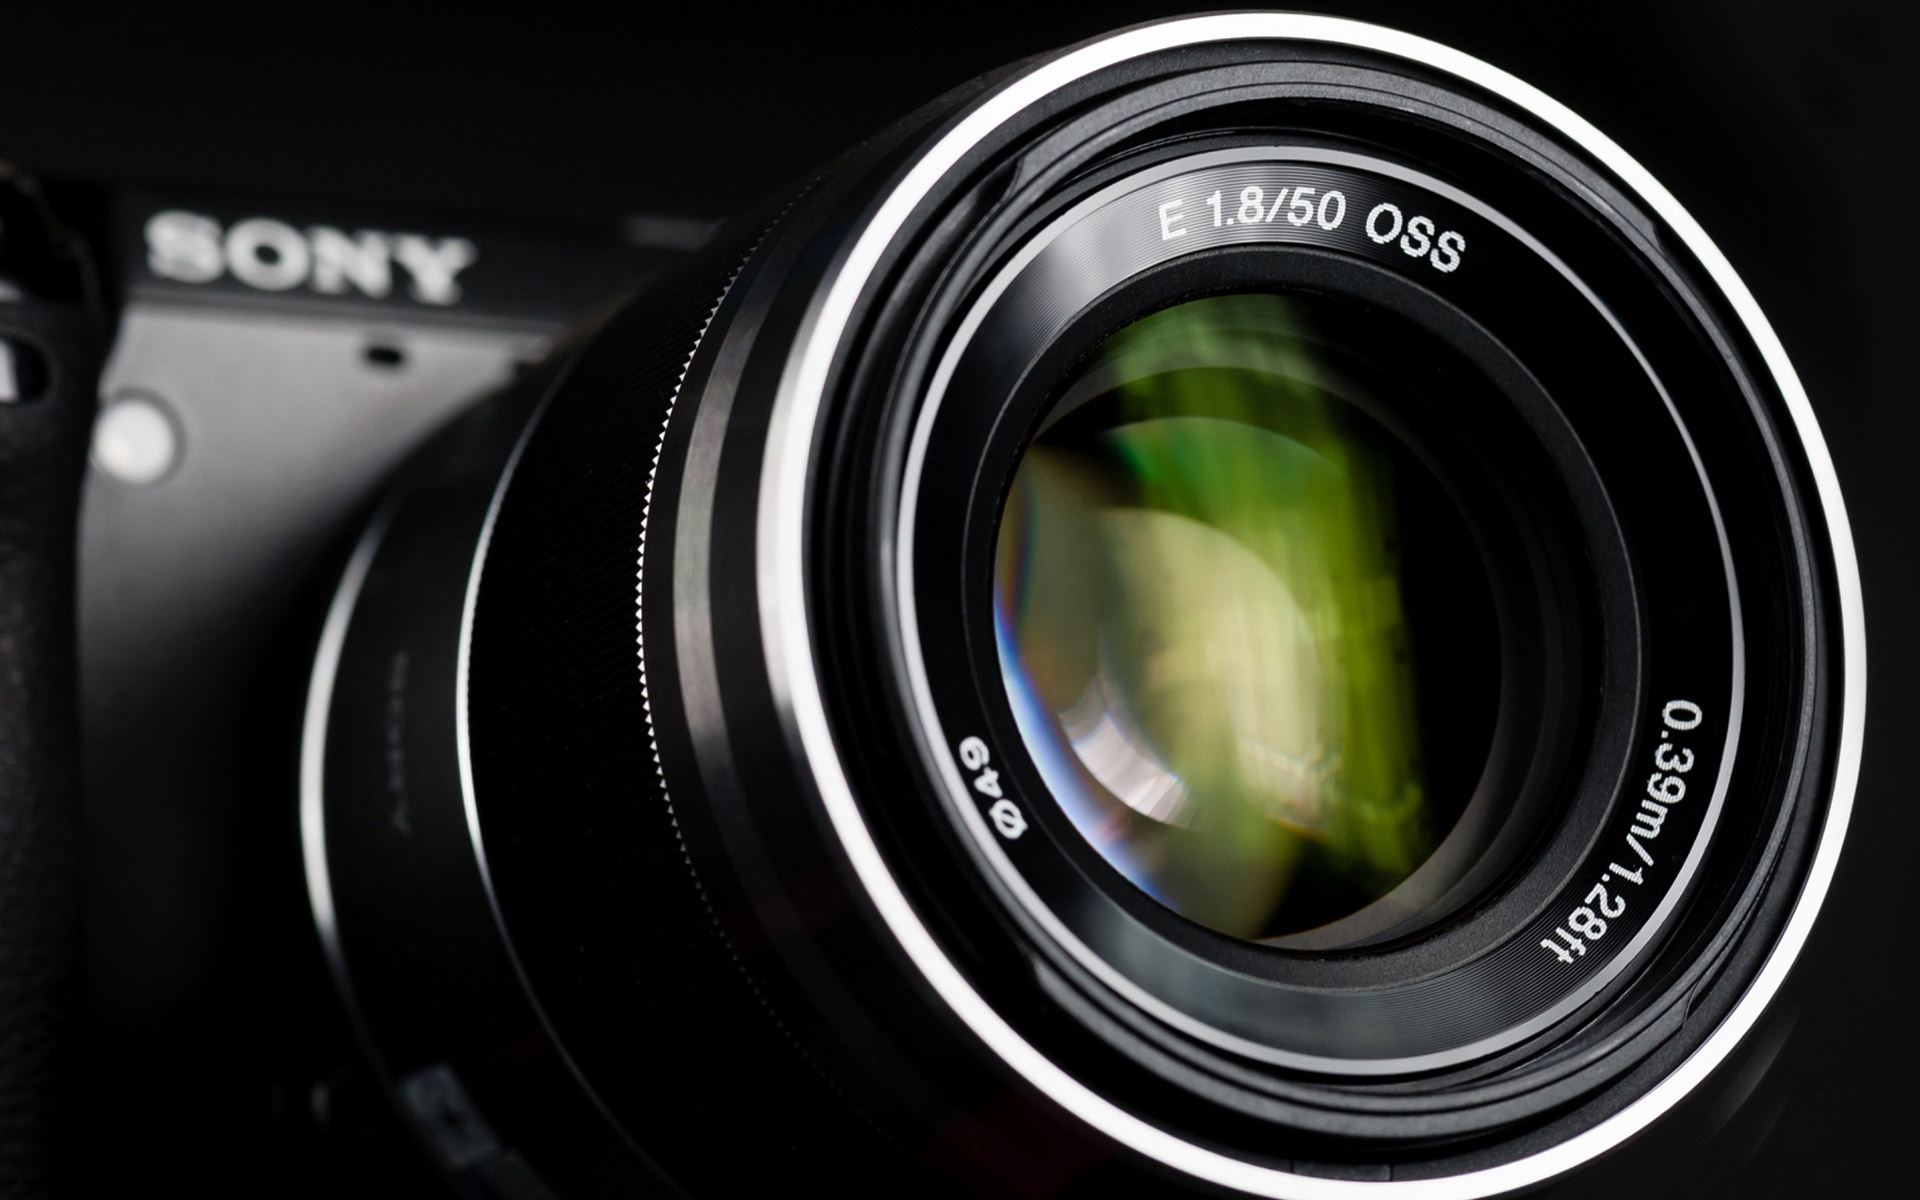 Camera Lens Technology Of Sony Hd Wallpaper Wallpapers Free